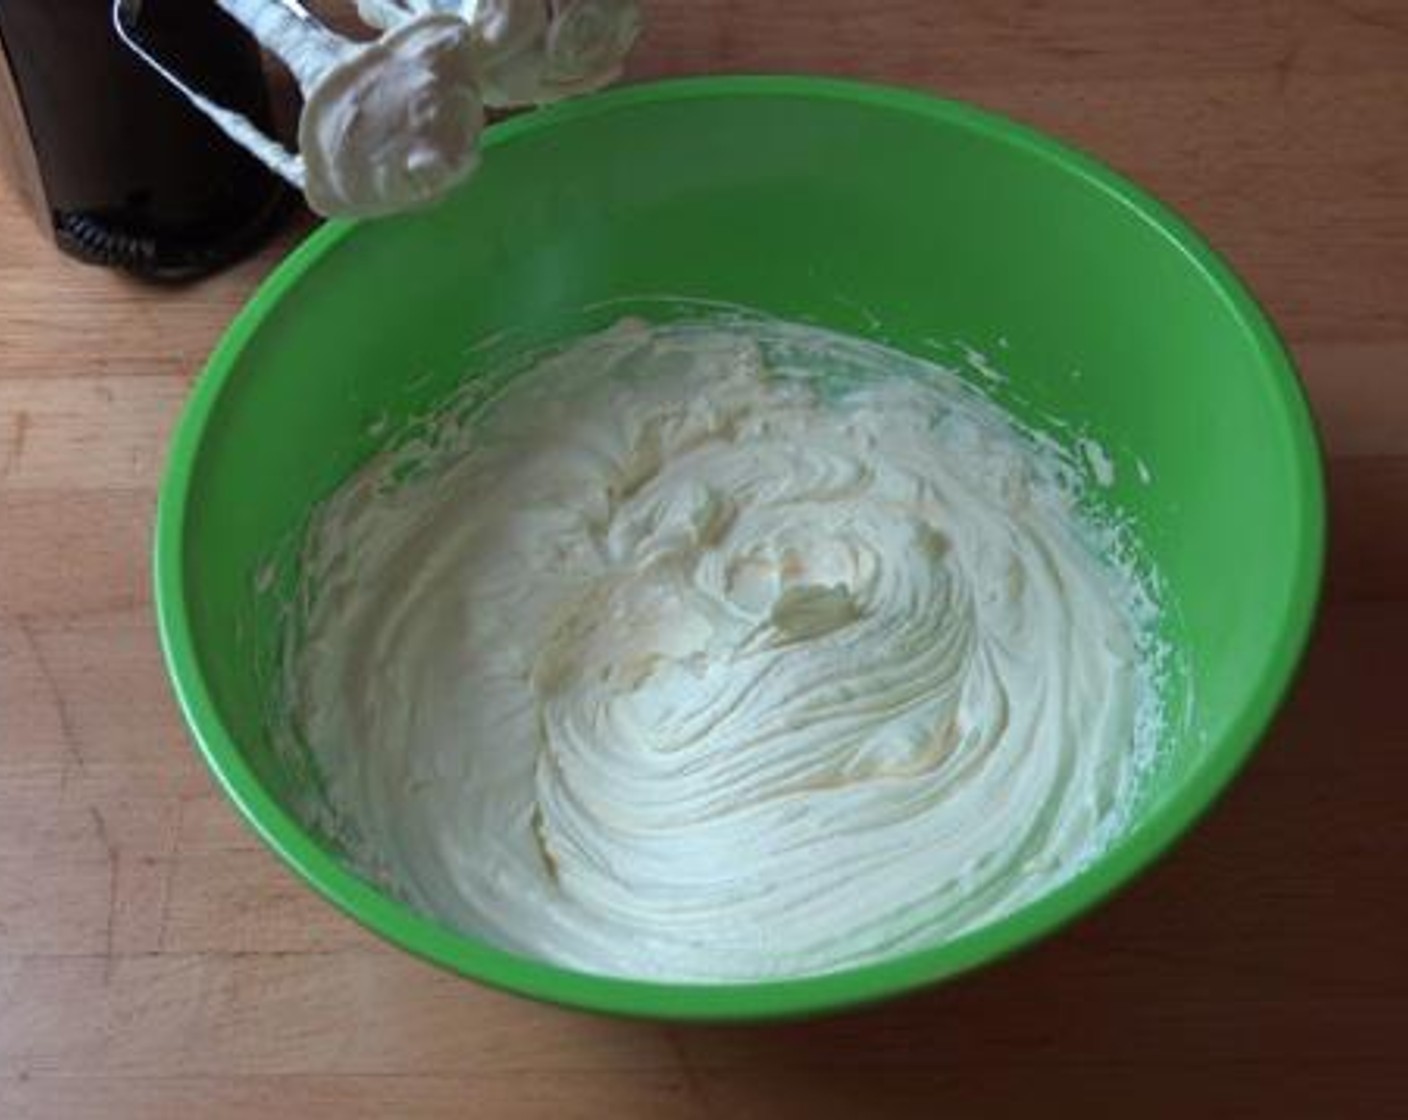 step 3 In a separate mixing bowl, add the remaining cup of whipping cream, and using a hand mixer, beat up the cream until it has soft and nice texture.